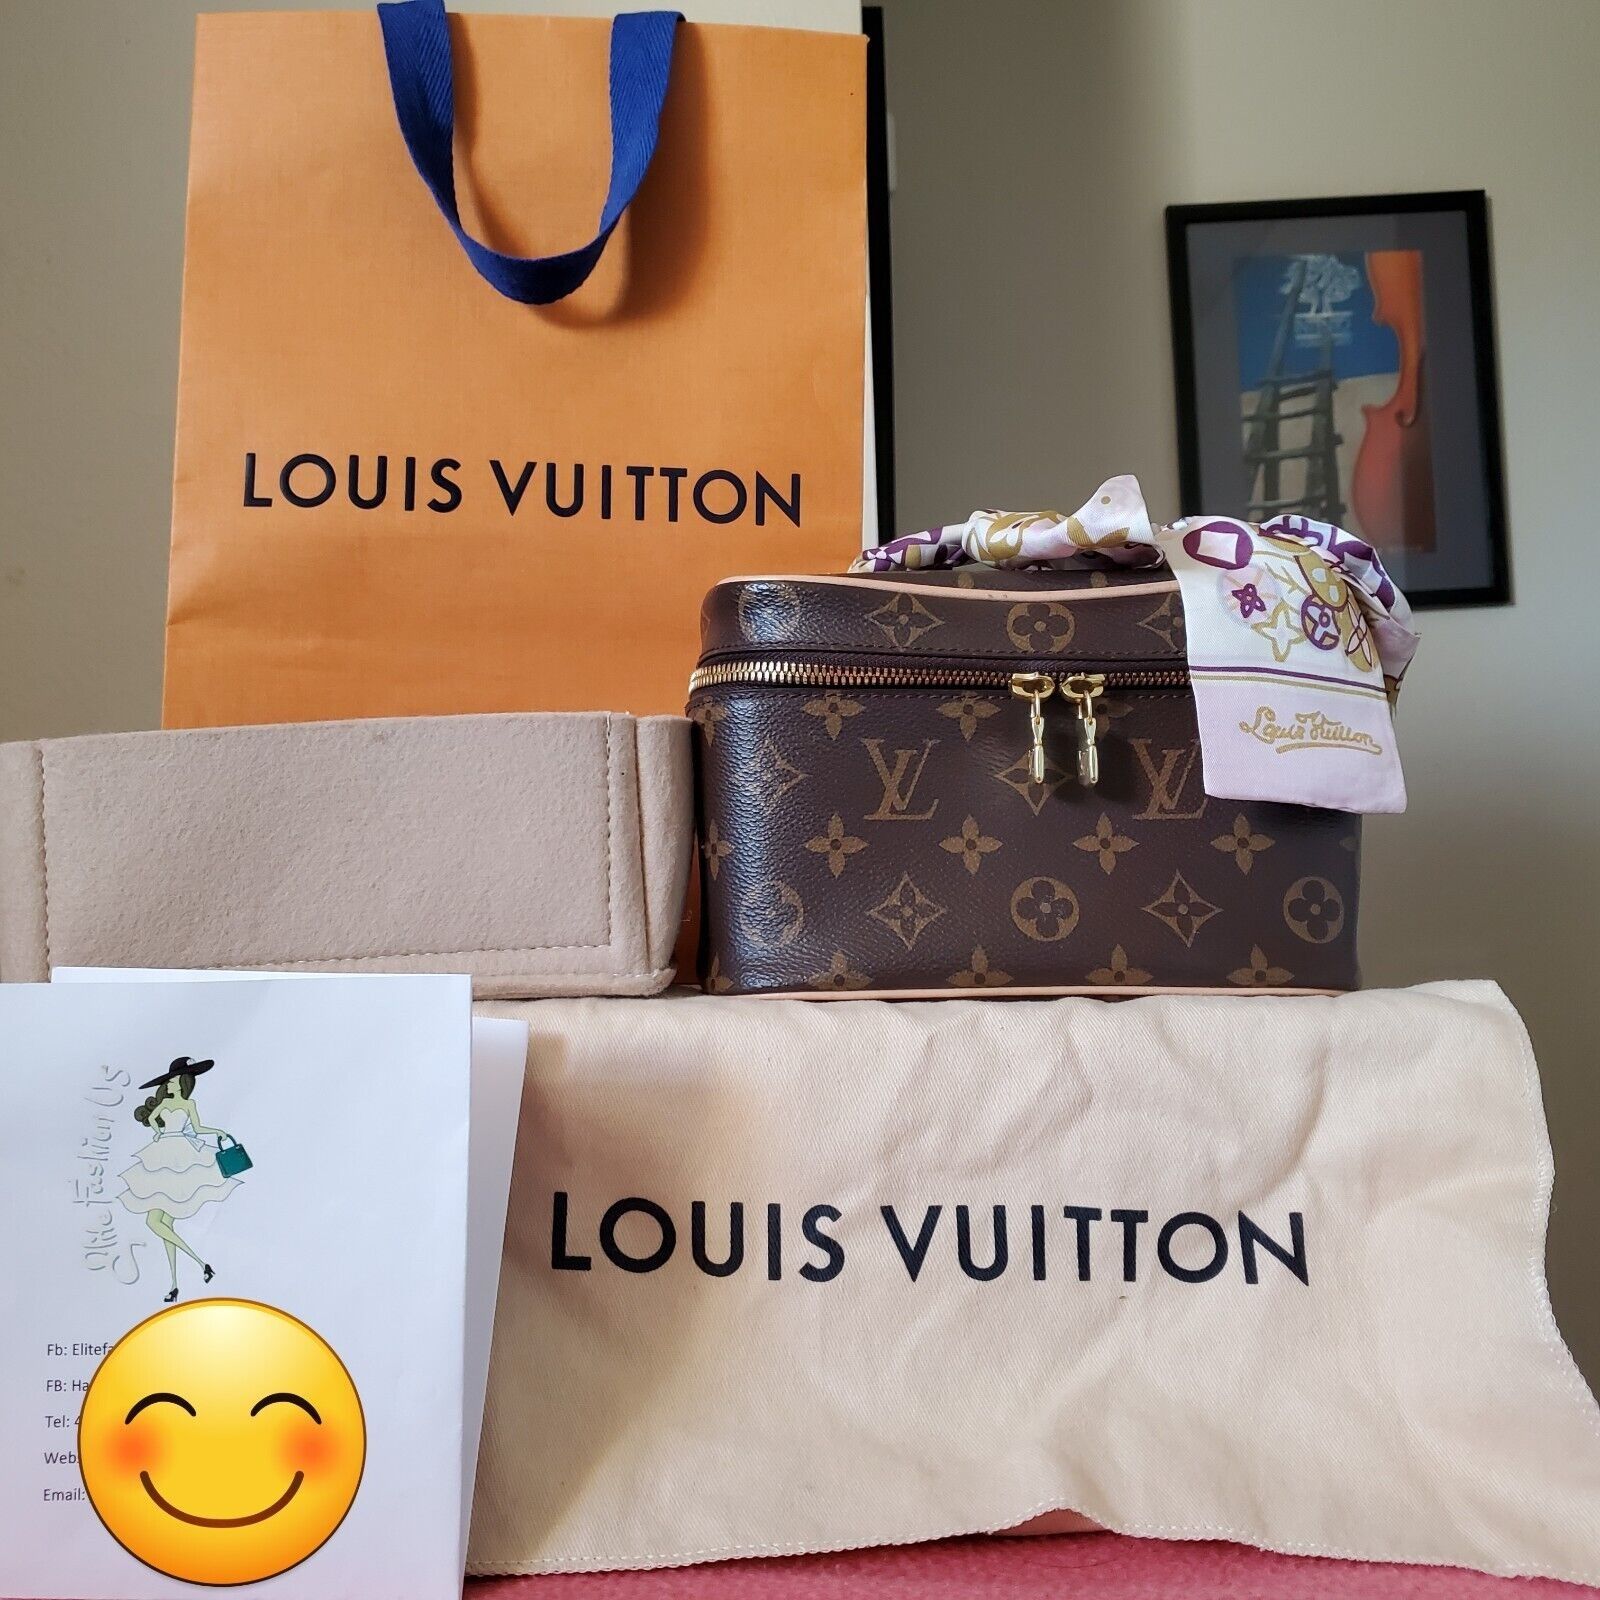 Louis Vuiton Nice Bb, Luxury, Bags & Wallets on Carousell